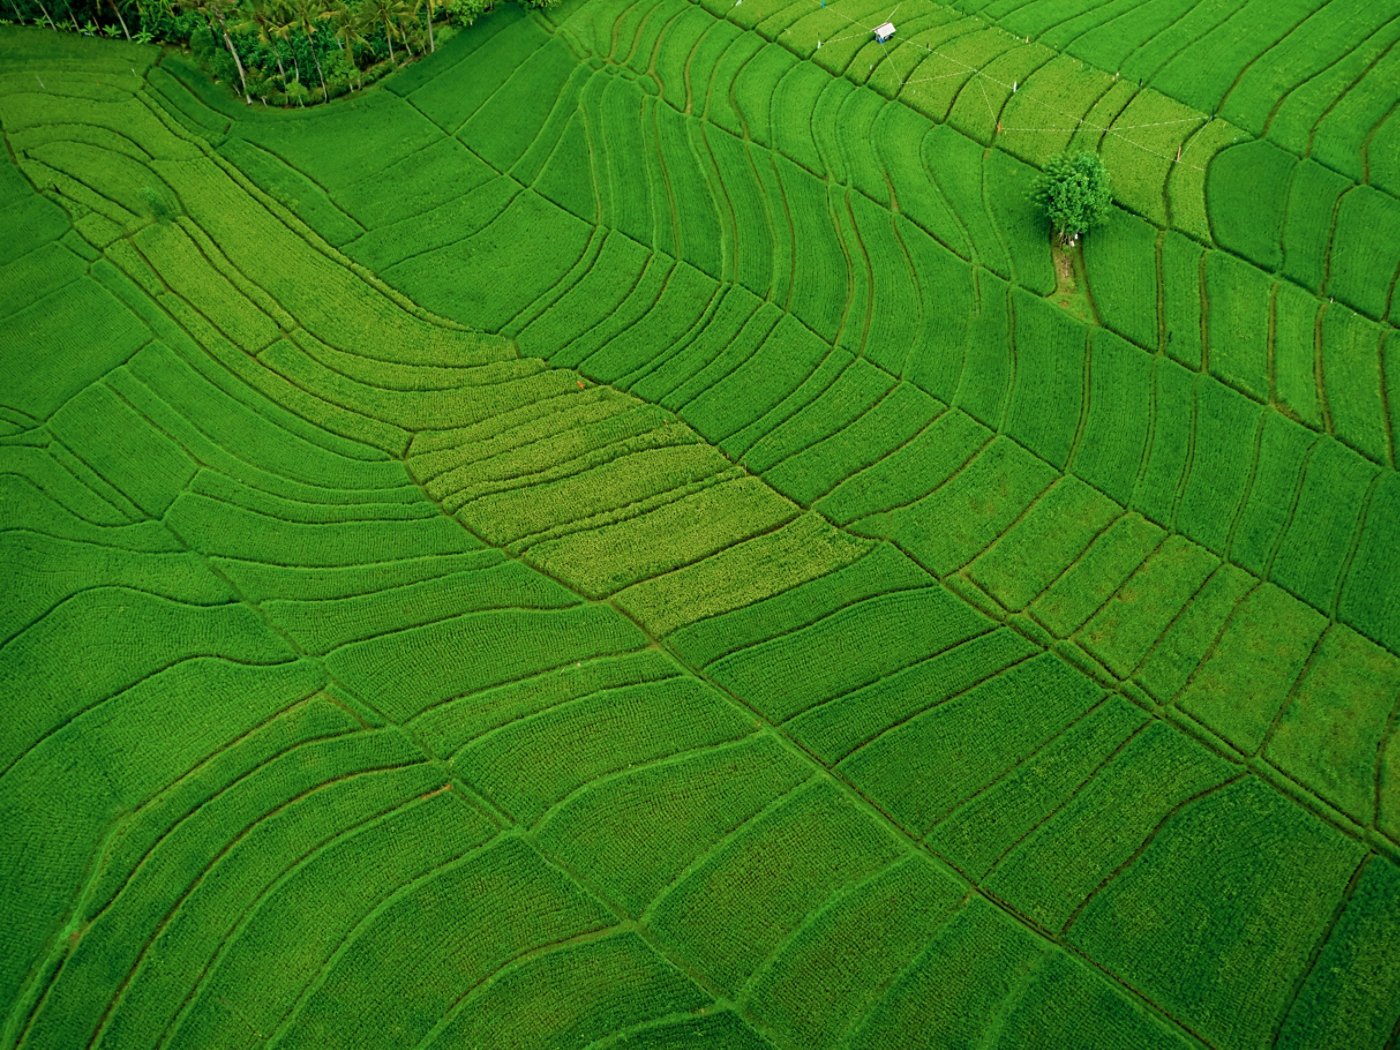 Green and fresh rice fields filled with morning sun. Shot from high angle using drone.